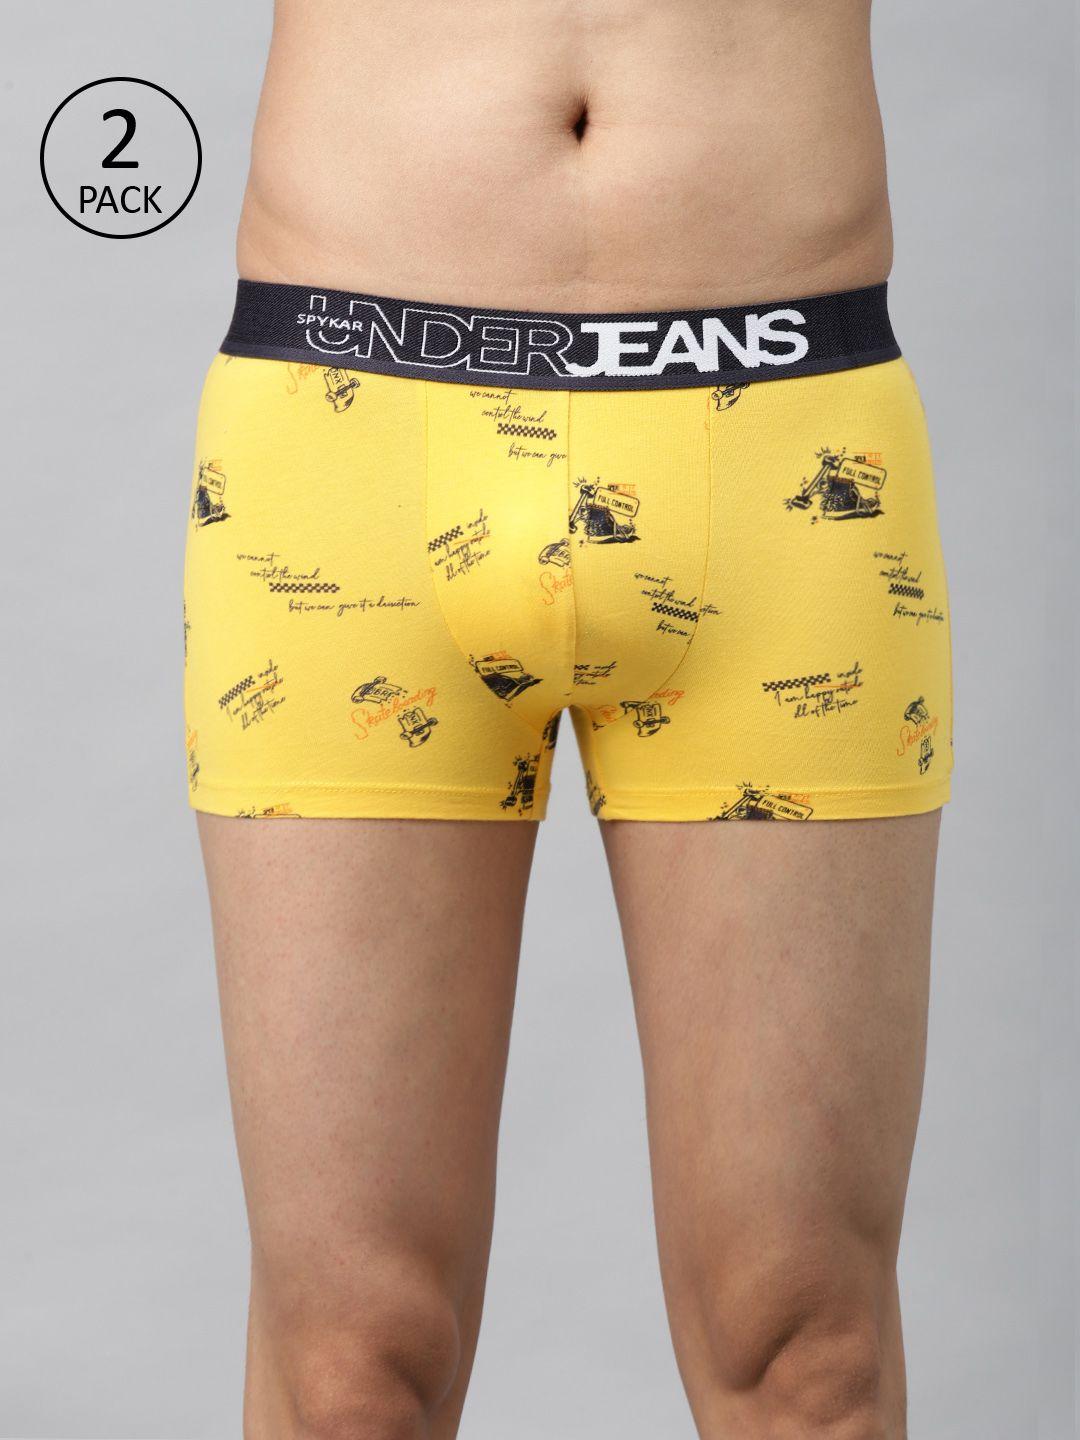 underjeans-by-spykar-men-pack-of-2-yellow-&-navy-blue-printed-trunks-8907966433601